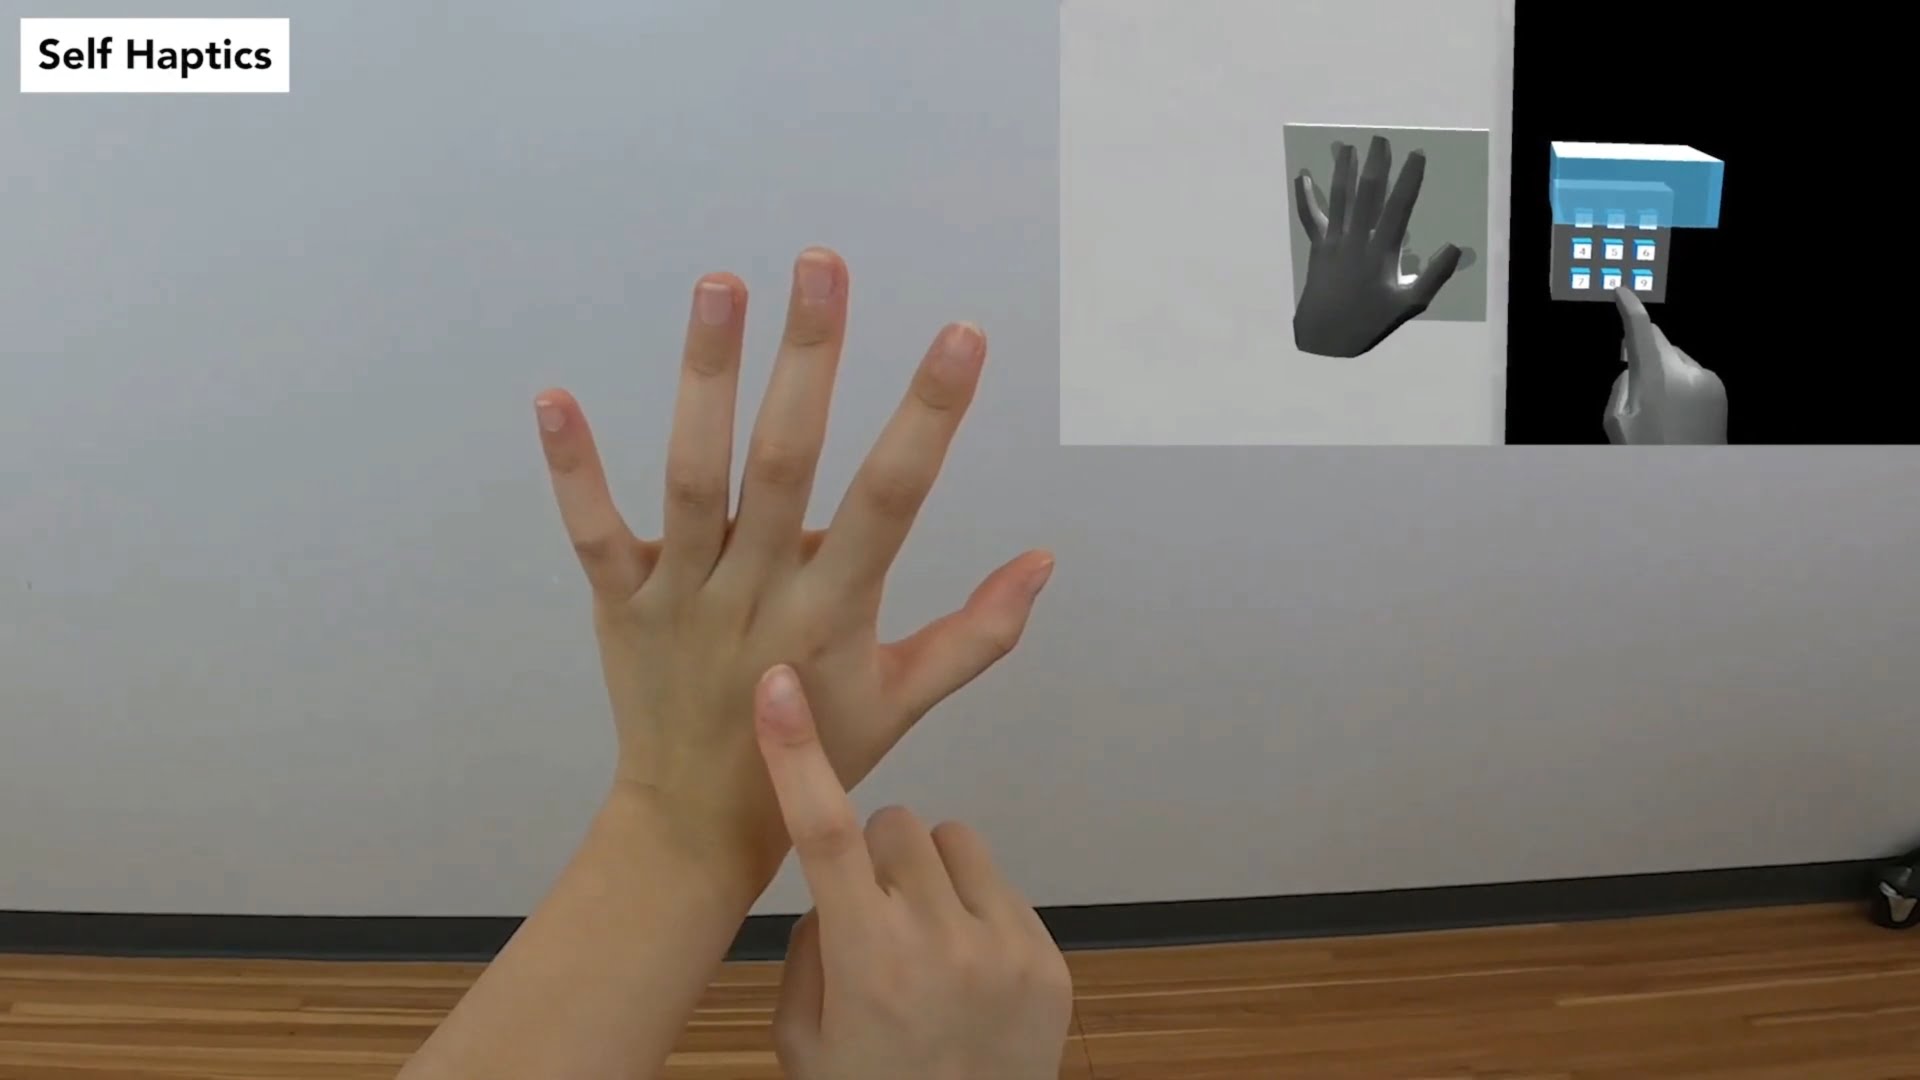 VR users could touch themselves for virtual haptics